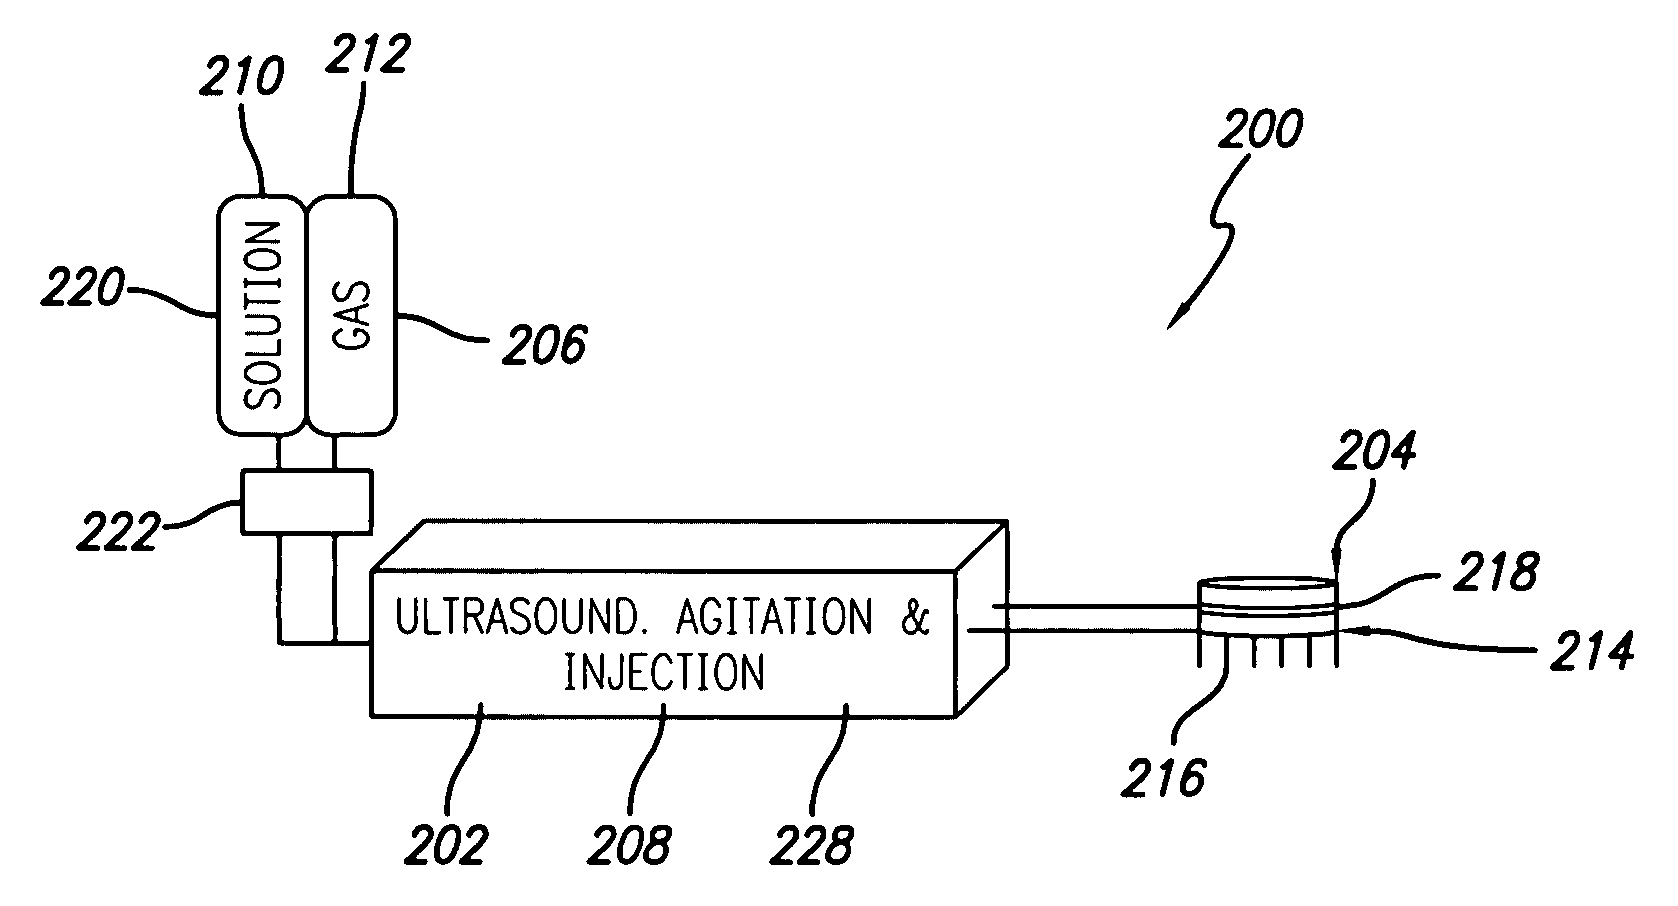 Apparatus for treating subcutaneous tissues